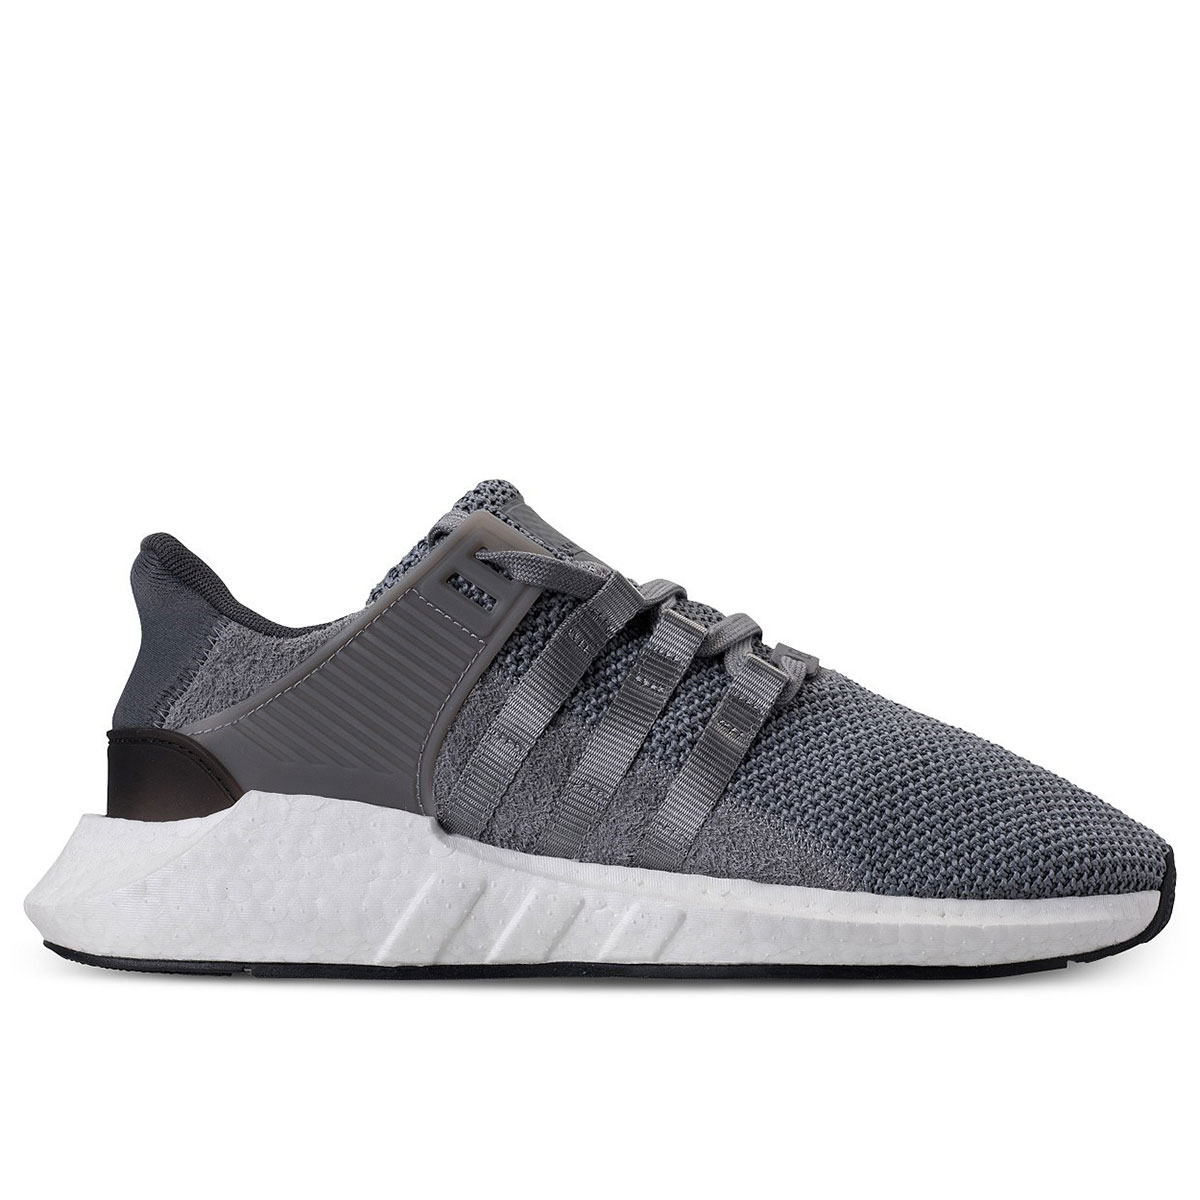 adidas EQT Support 93/17 Boost  BY9511